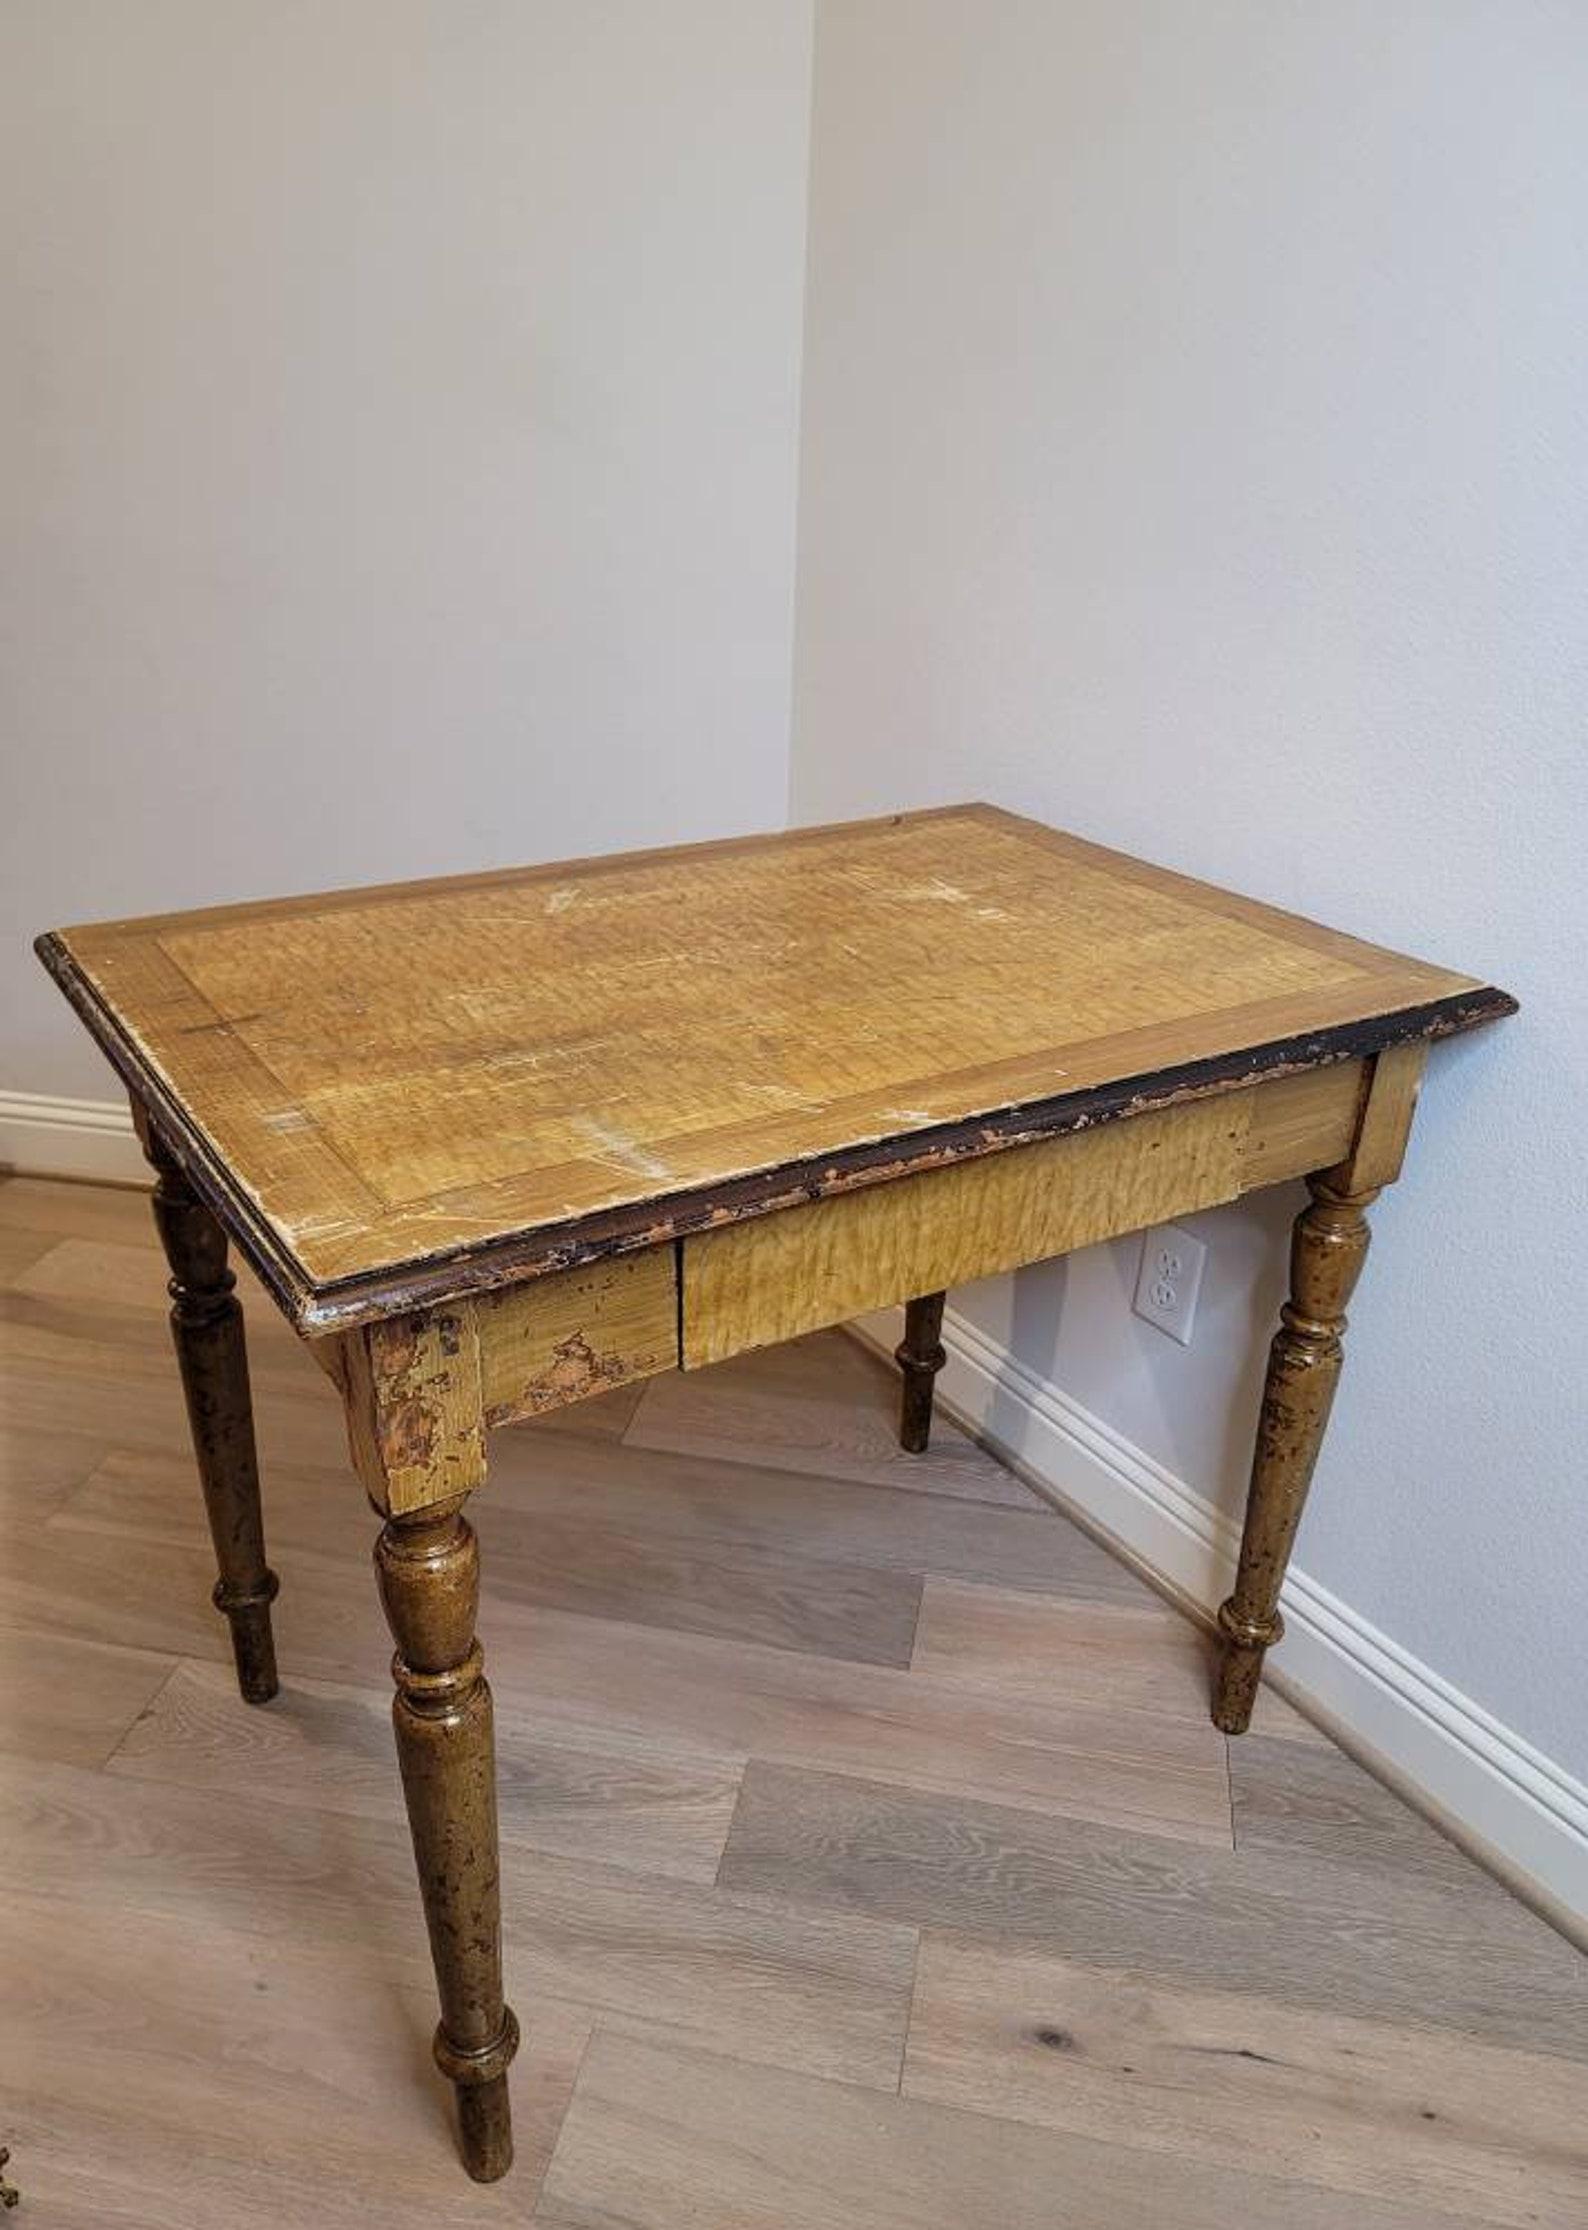 19th Century Antique Distressed Country Farmhouse Work Table For Sale